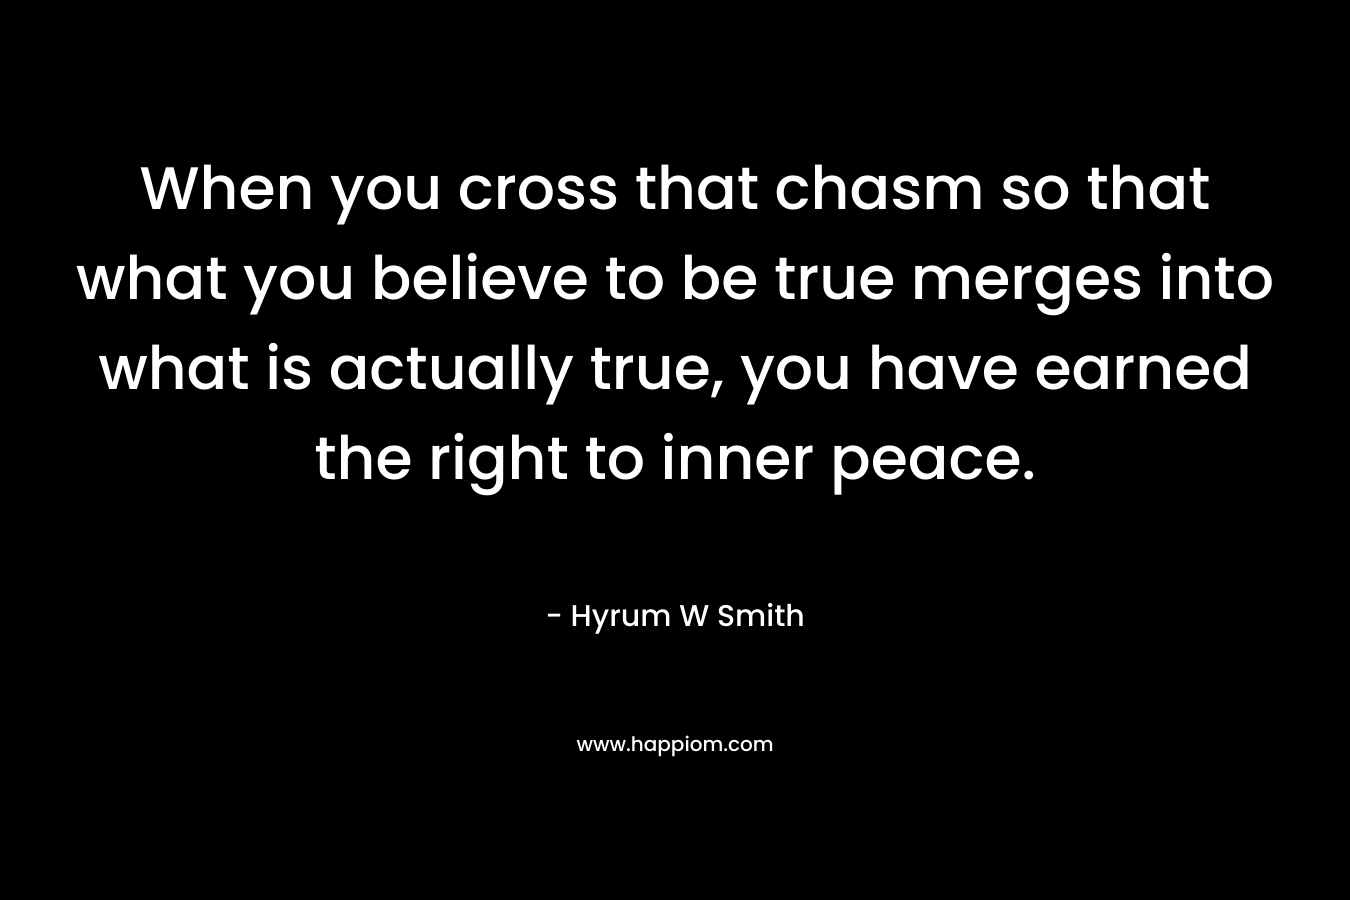 When you cross that chasm so that what you believe to be true merges into what is actually true, you have earned the right to inner peace. – Hyrum W Smith